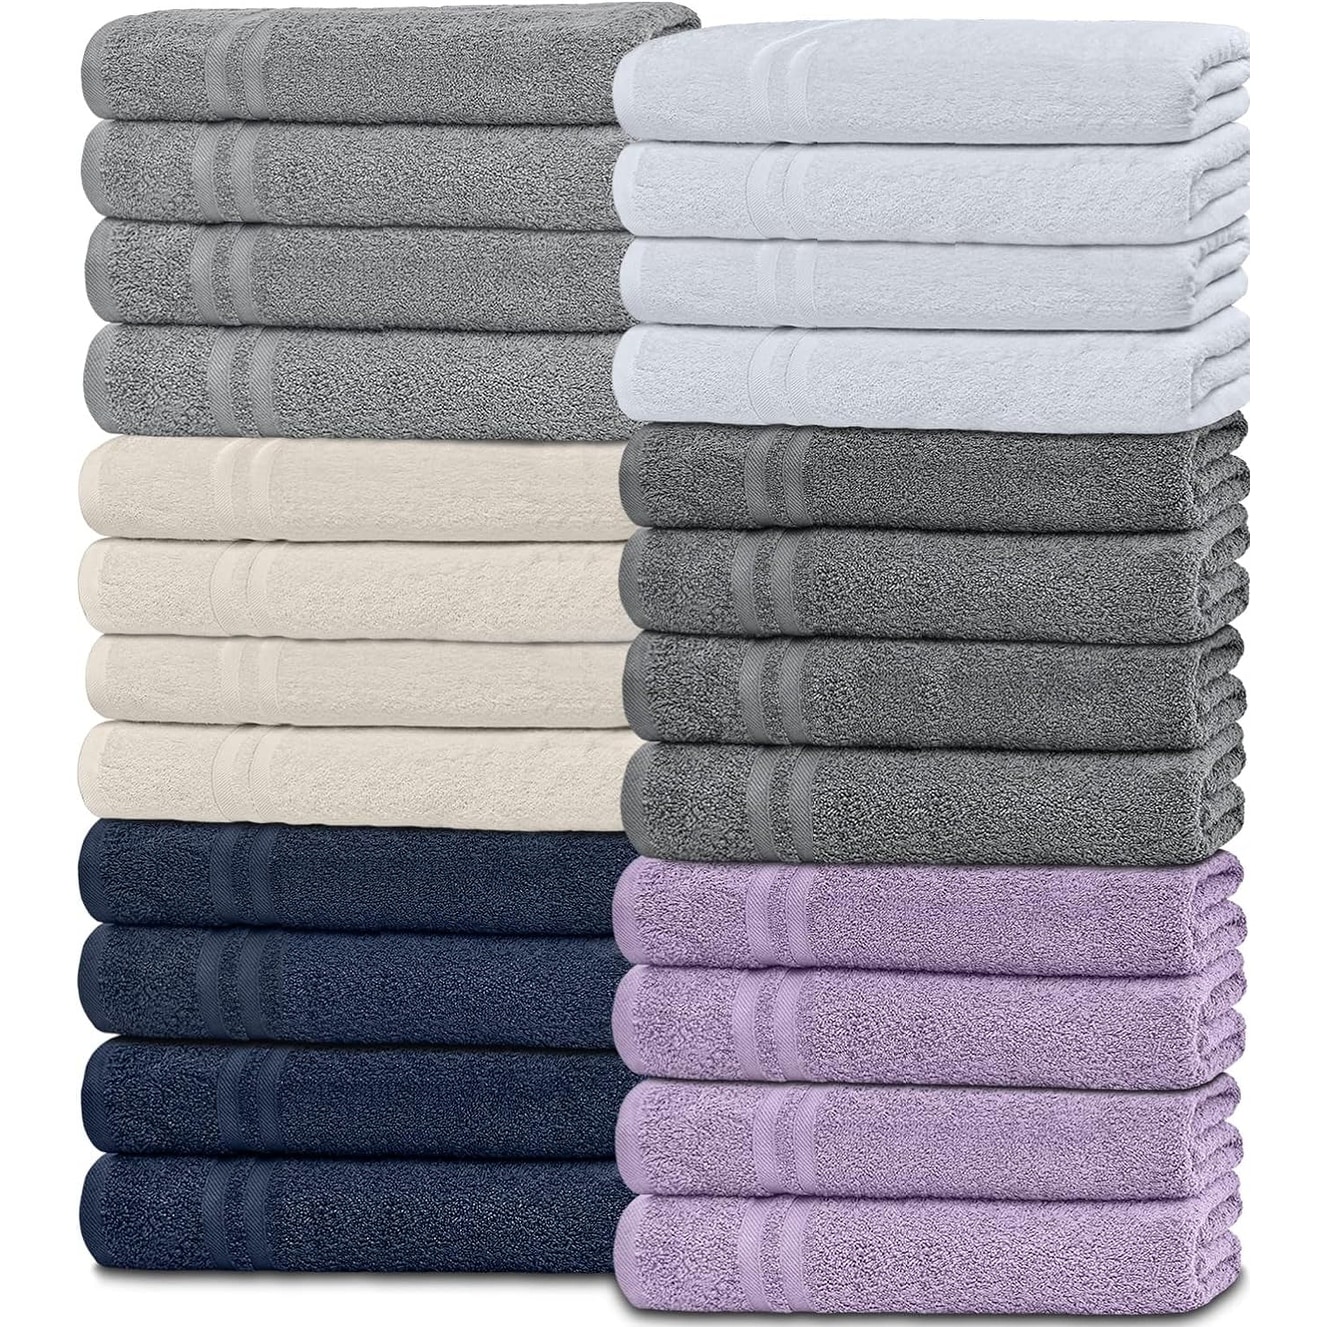 https://ak1.ostkcdn.com/images/products/is/images/direct/67cdc181a7e8ff0c08b90b47b09572a0812962a6/24-Pack-Wealuxe-Cotton-Washcloths.jpg